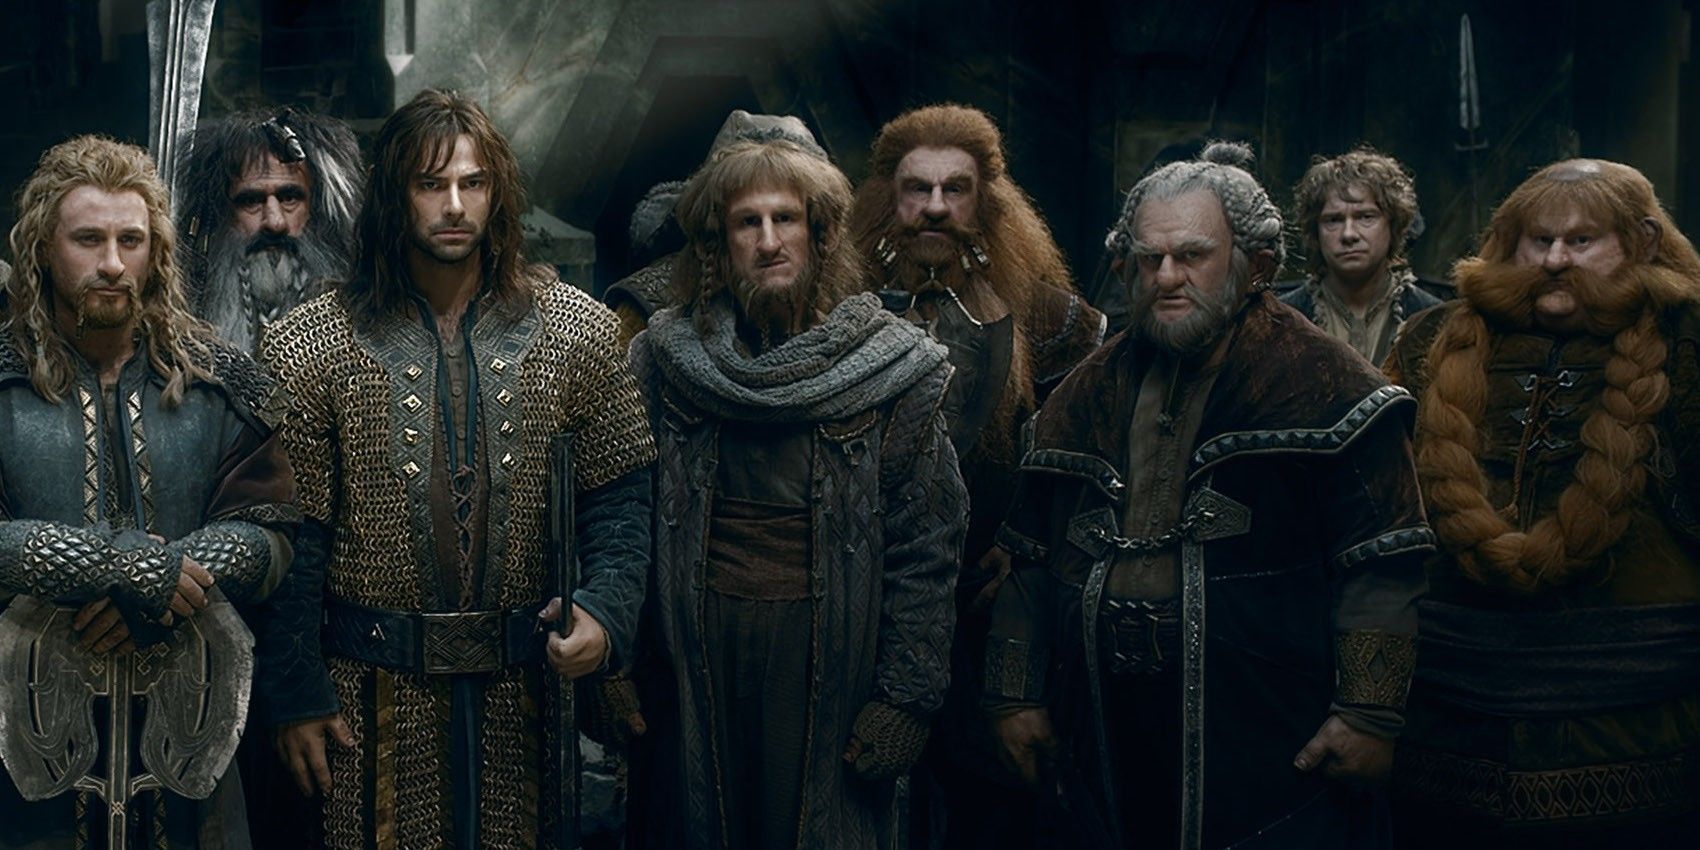 the hobbit characters dwarves